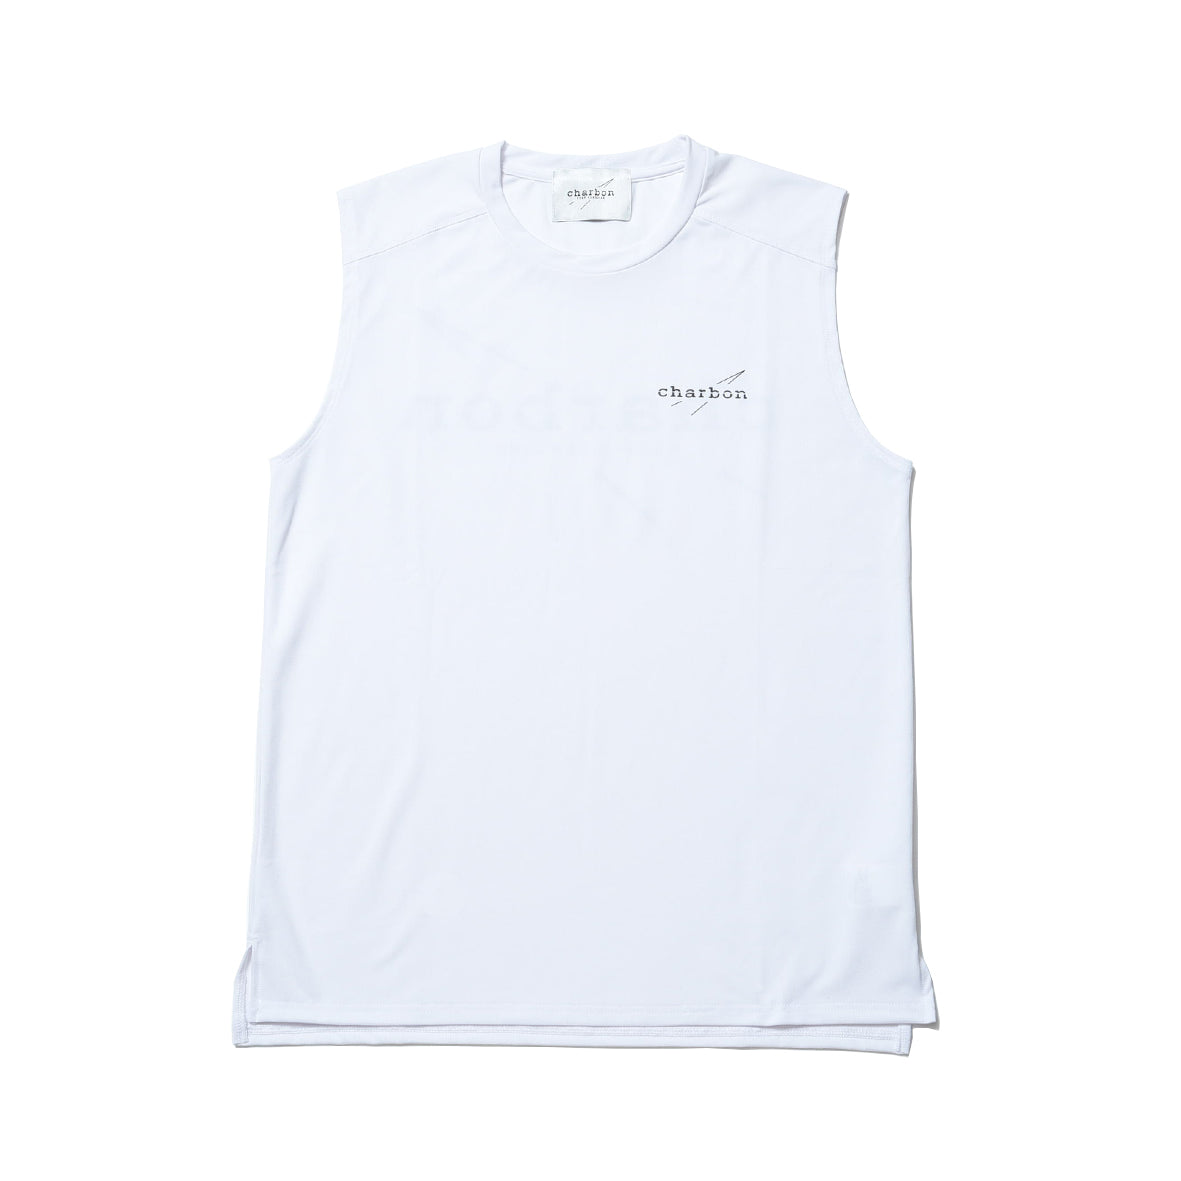 DRY SMOOTH NO SLEEVE T-SHIRTS